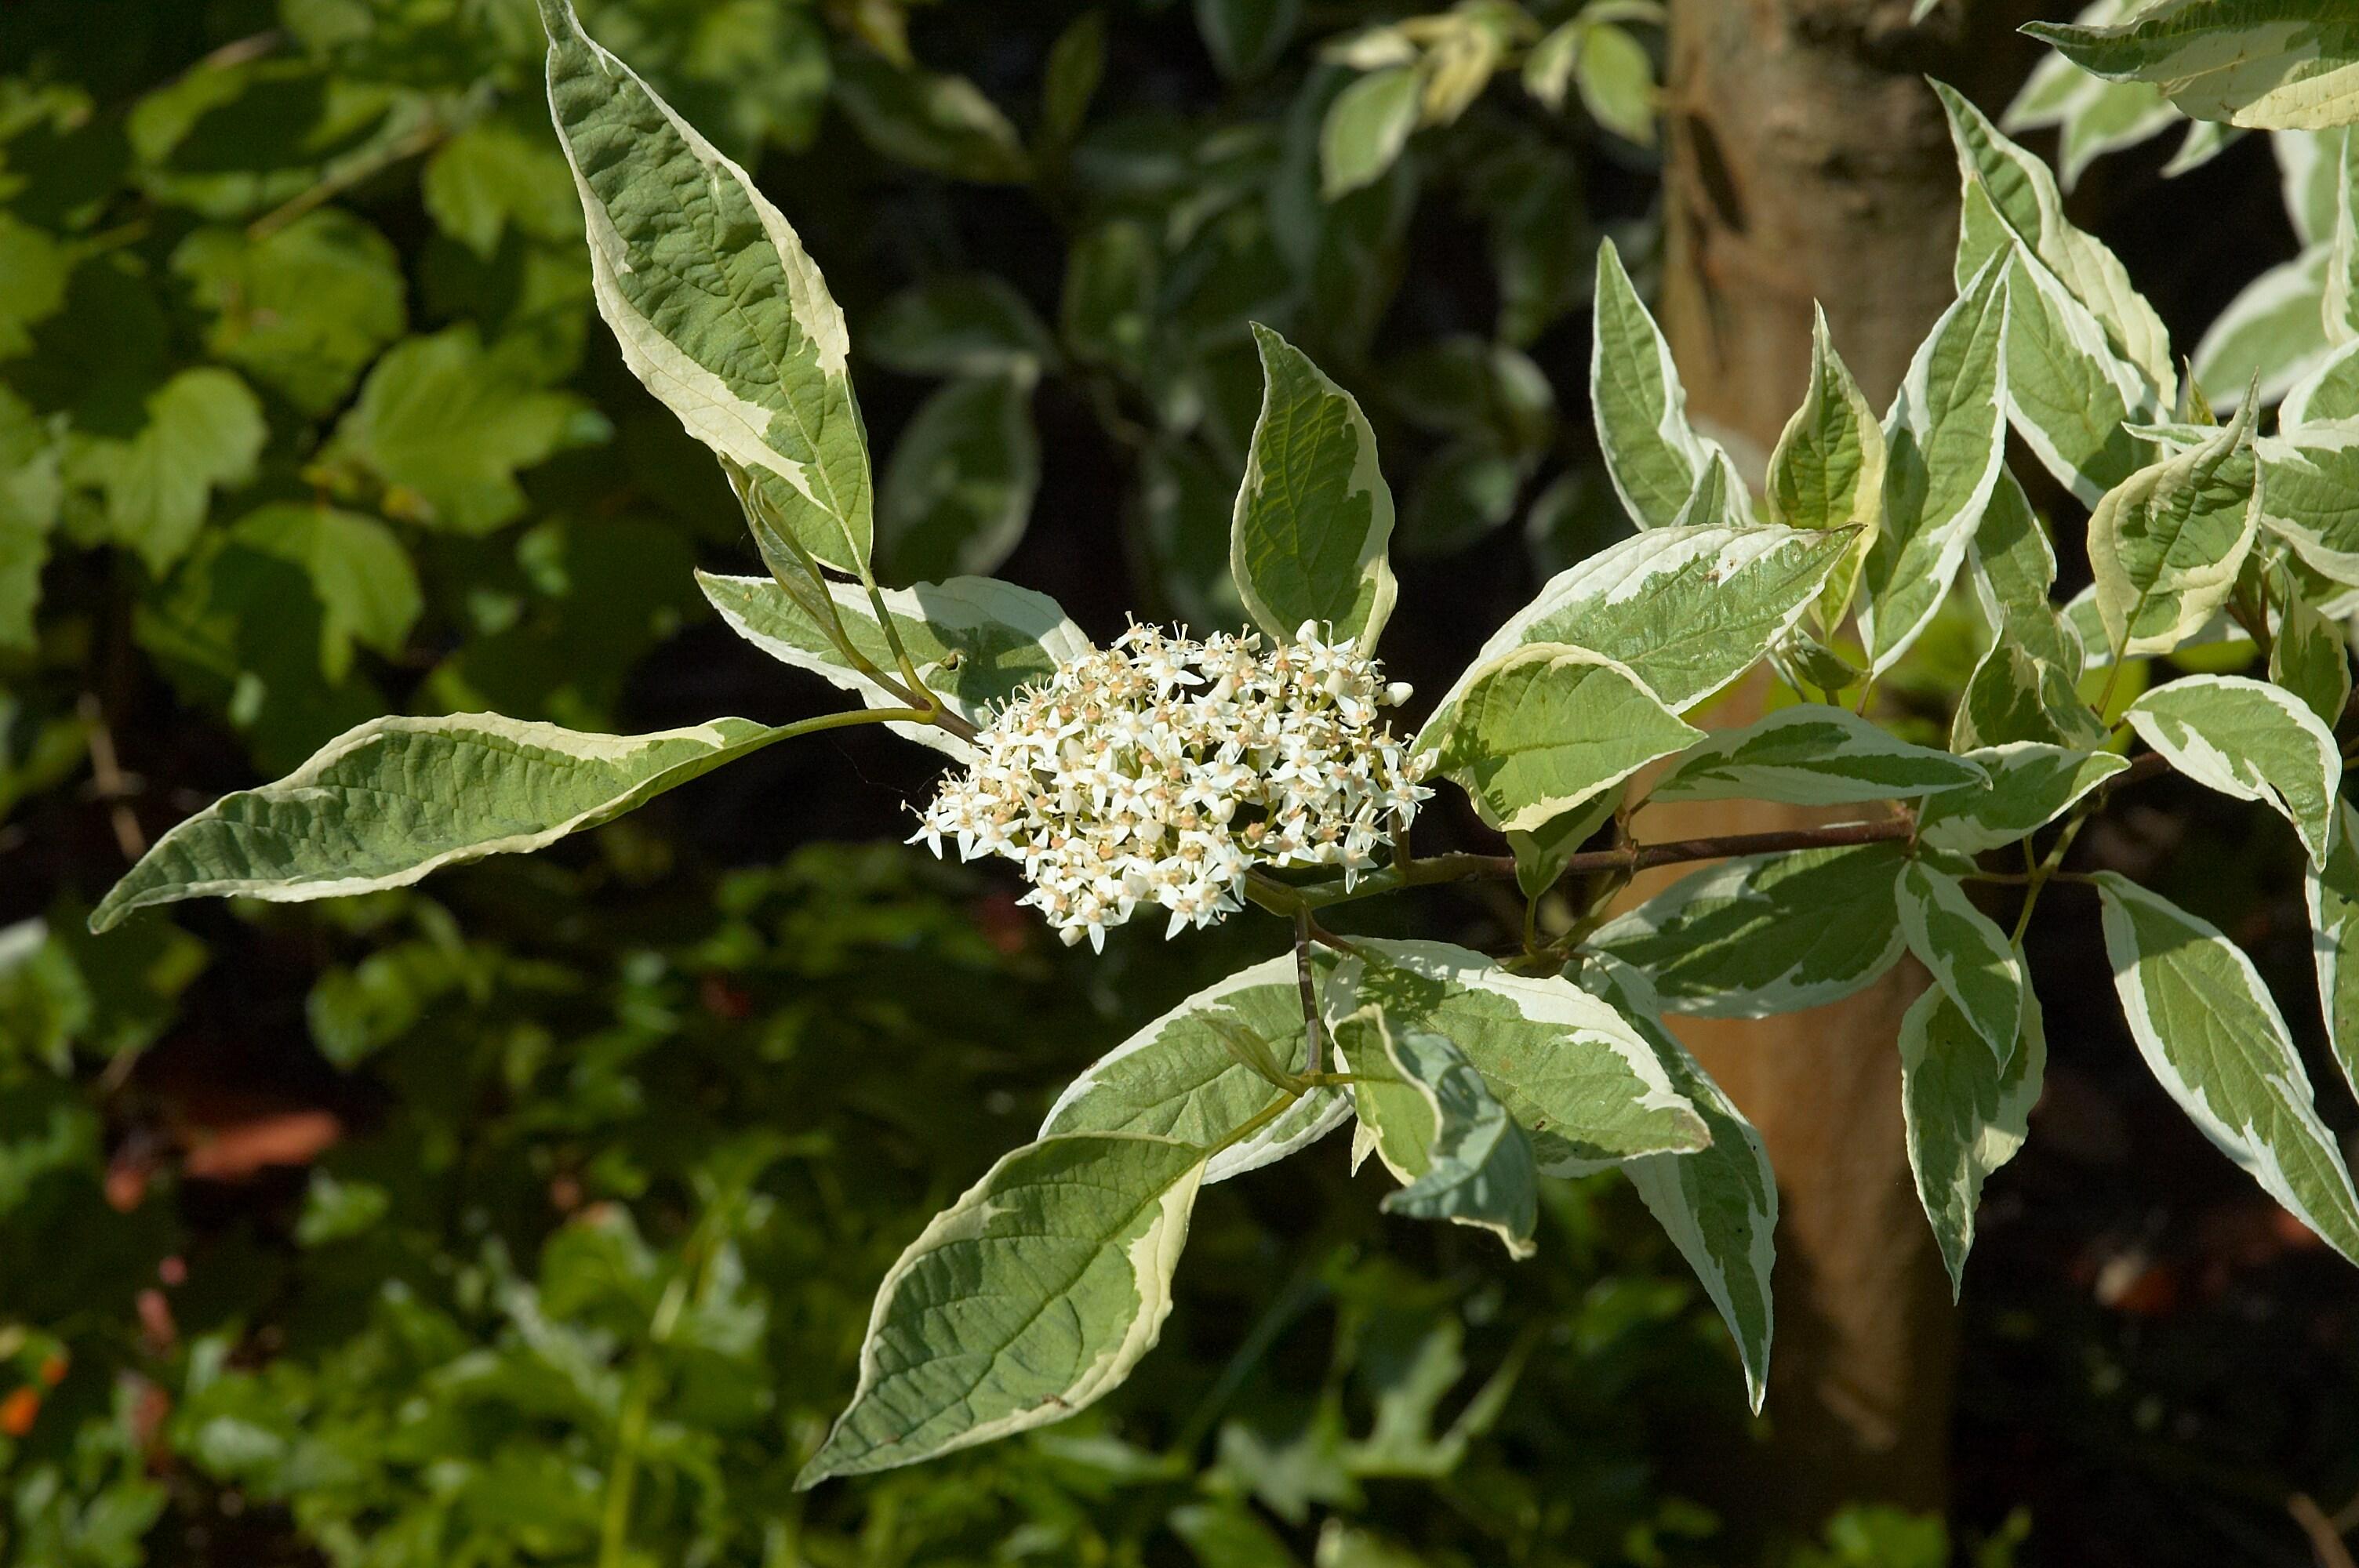 white flowers with beige center, white stamens, white-green leaves and green-brown stems

